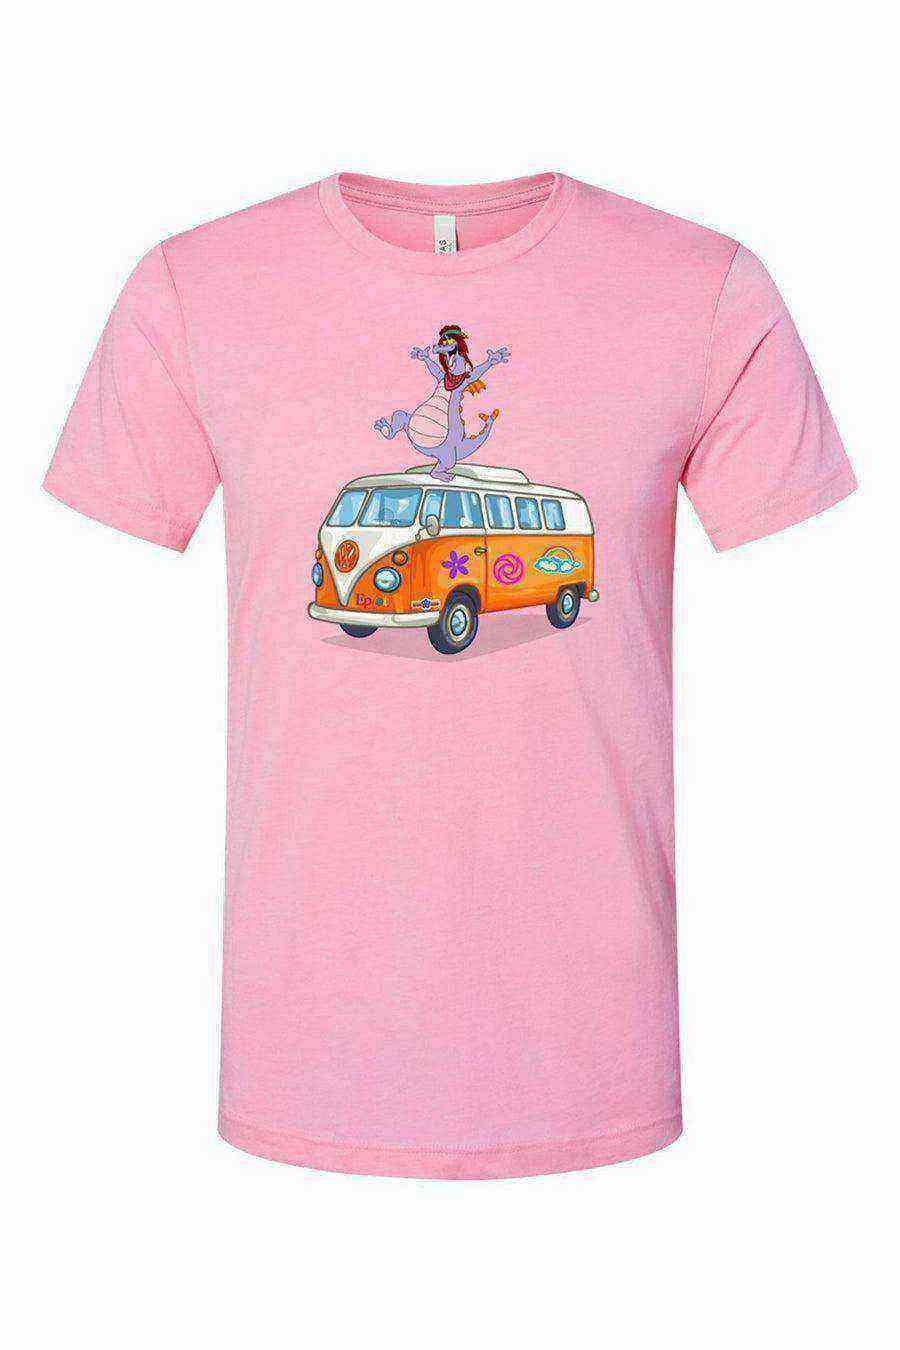 Groovy Figment Tee | Hippie Figment | Epcot Shirt - Dylan's Tees